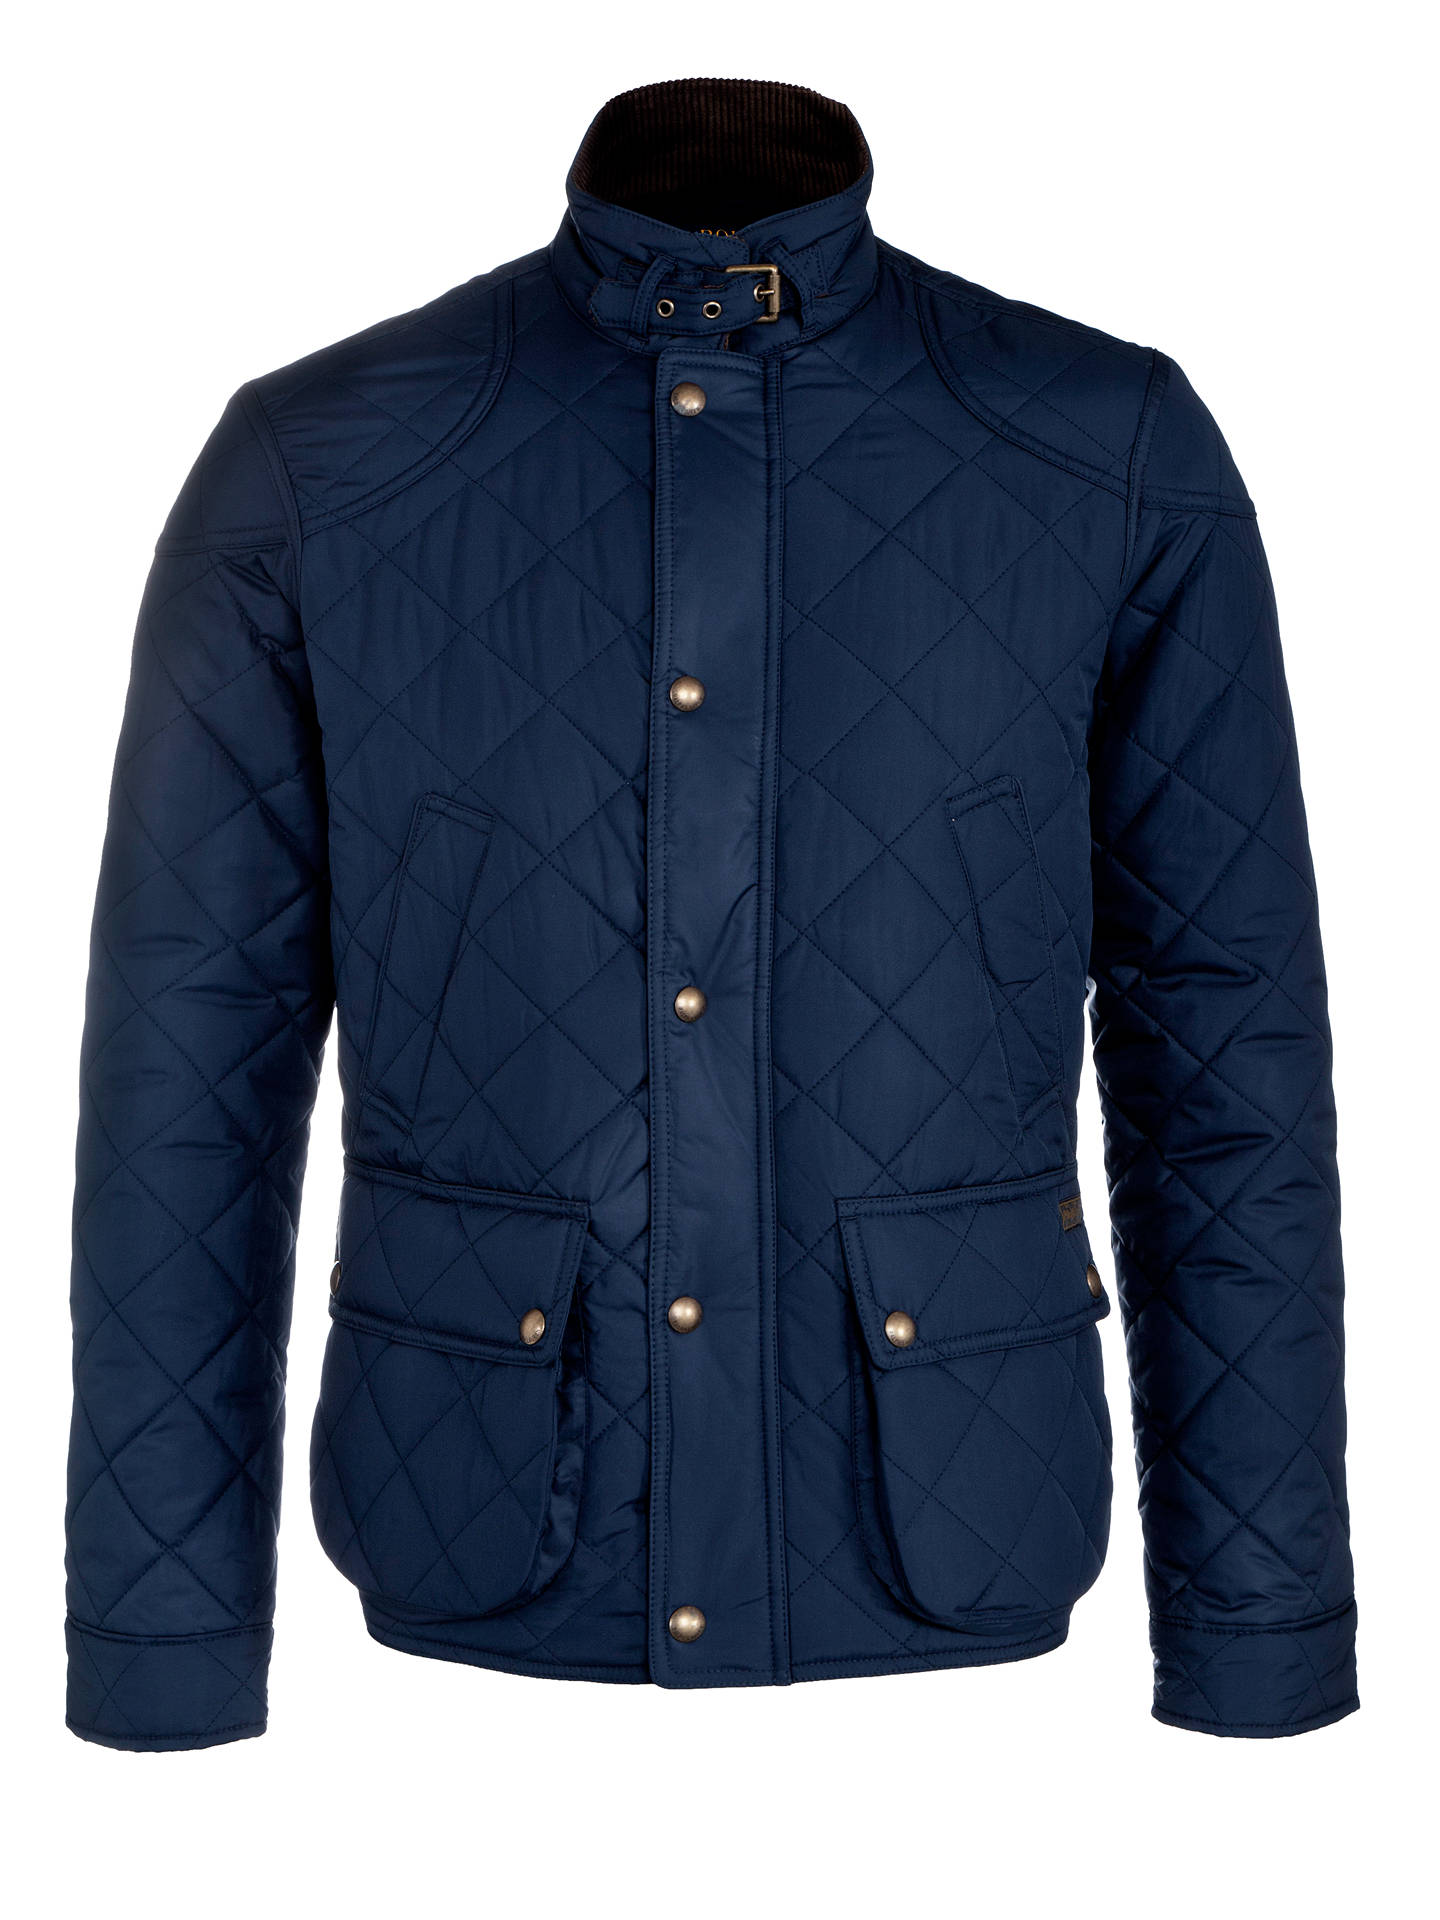 Polo Ralph Lauren Cadwell Quilted Bomber Jacket at John Lewis & Partners